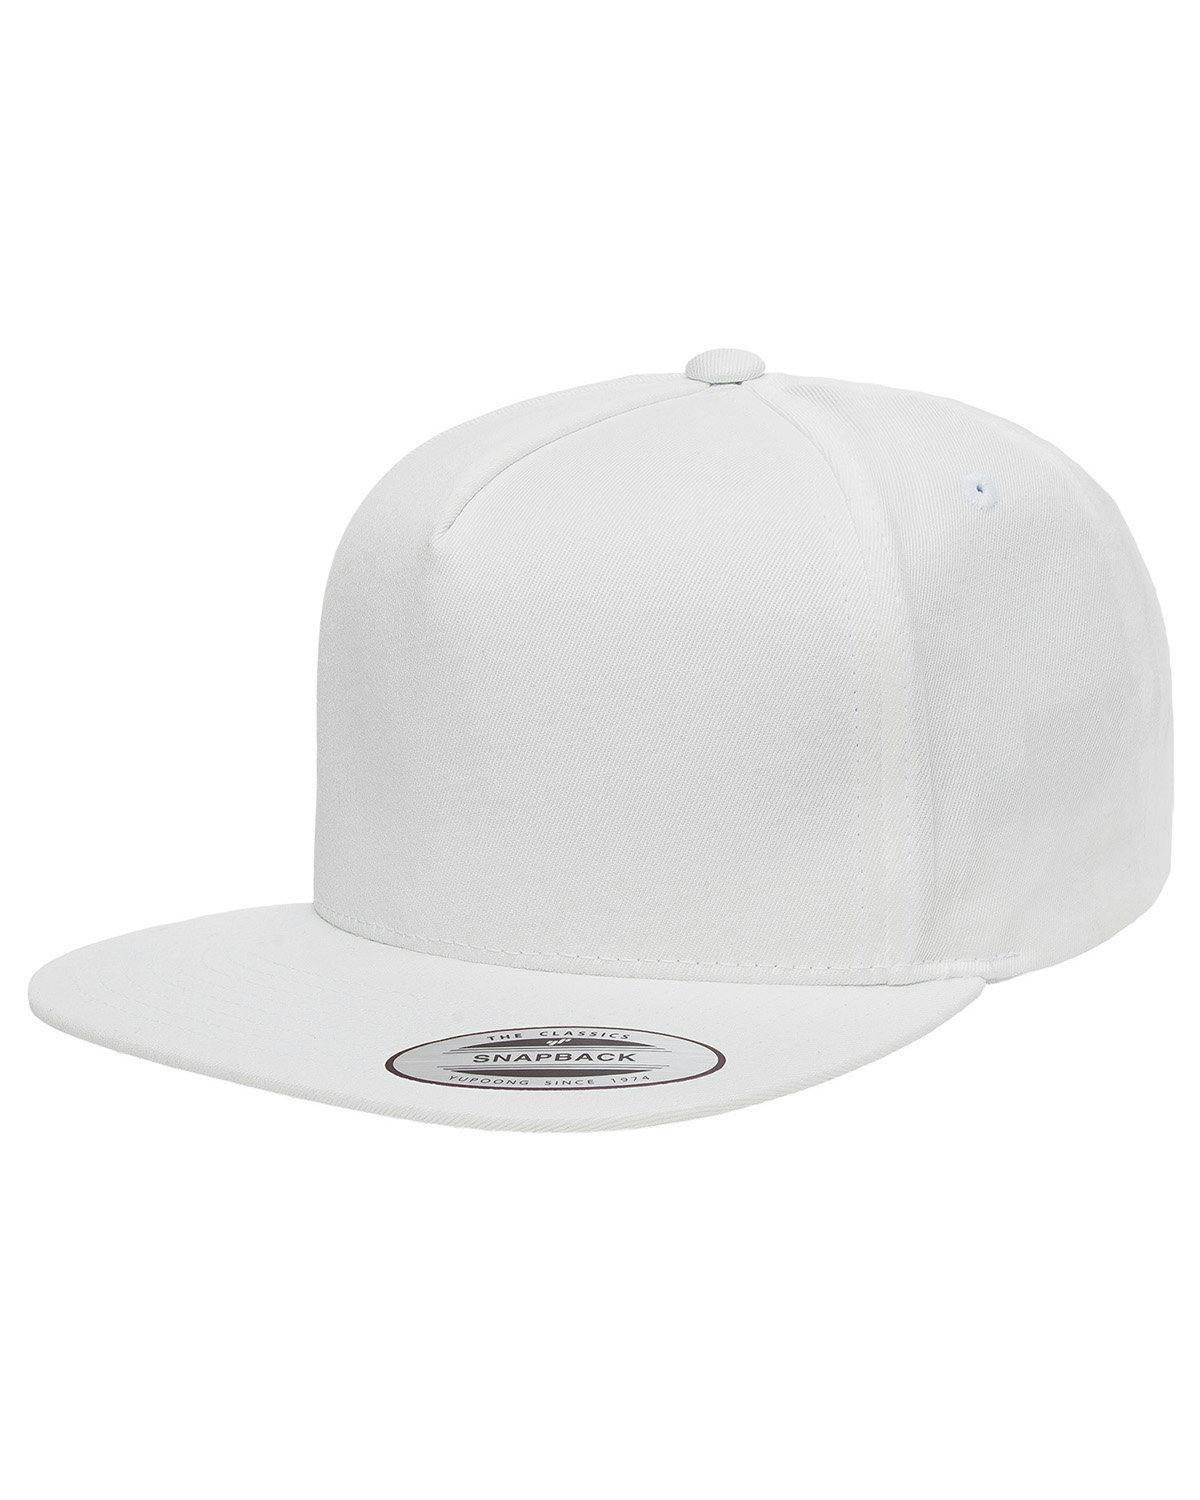 Image for Adult Cotton Twill Snapback Cap